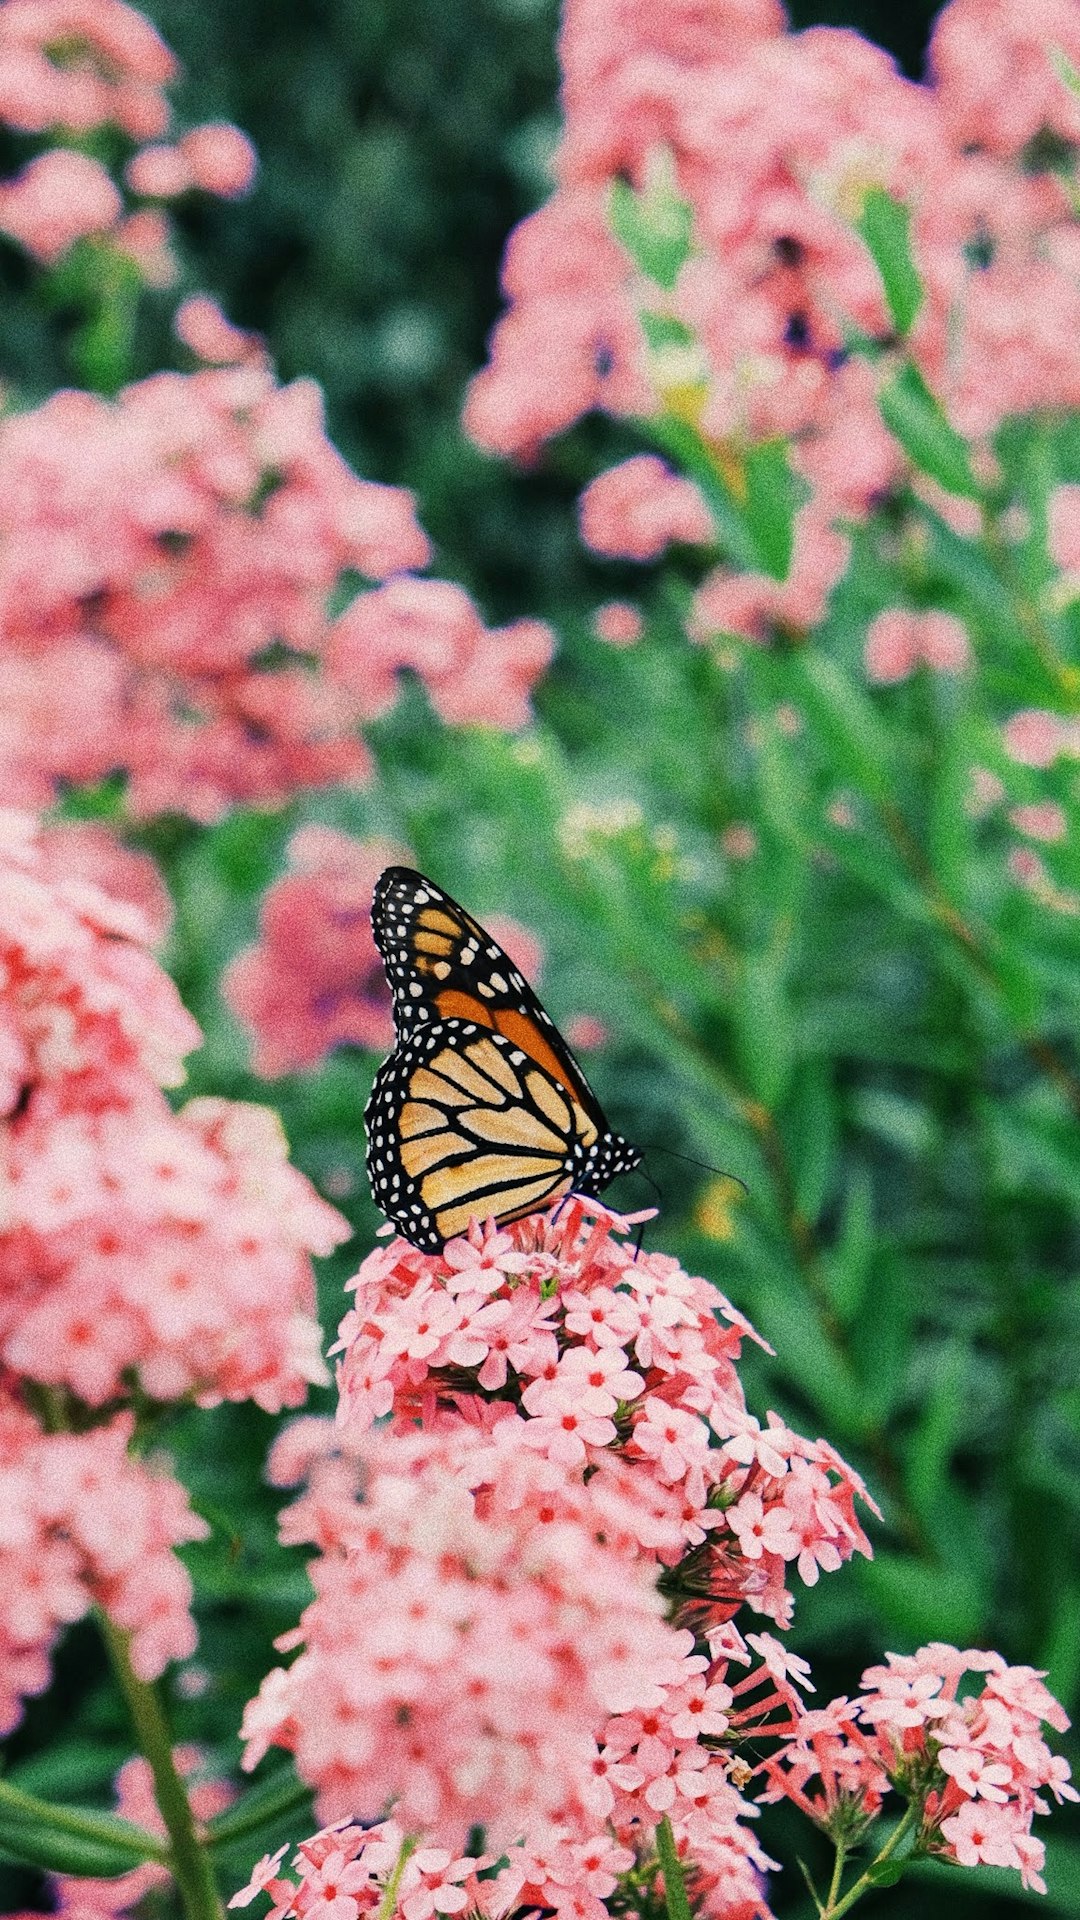 A photograph of a Monarch butterfly on pink flowers, taken with Kodak Portra film in the style of raw. –ar 9:16